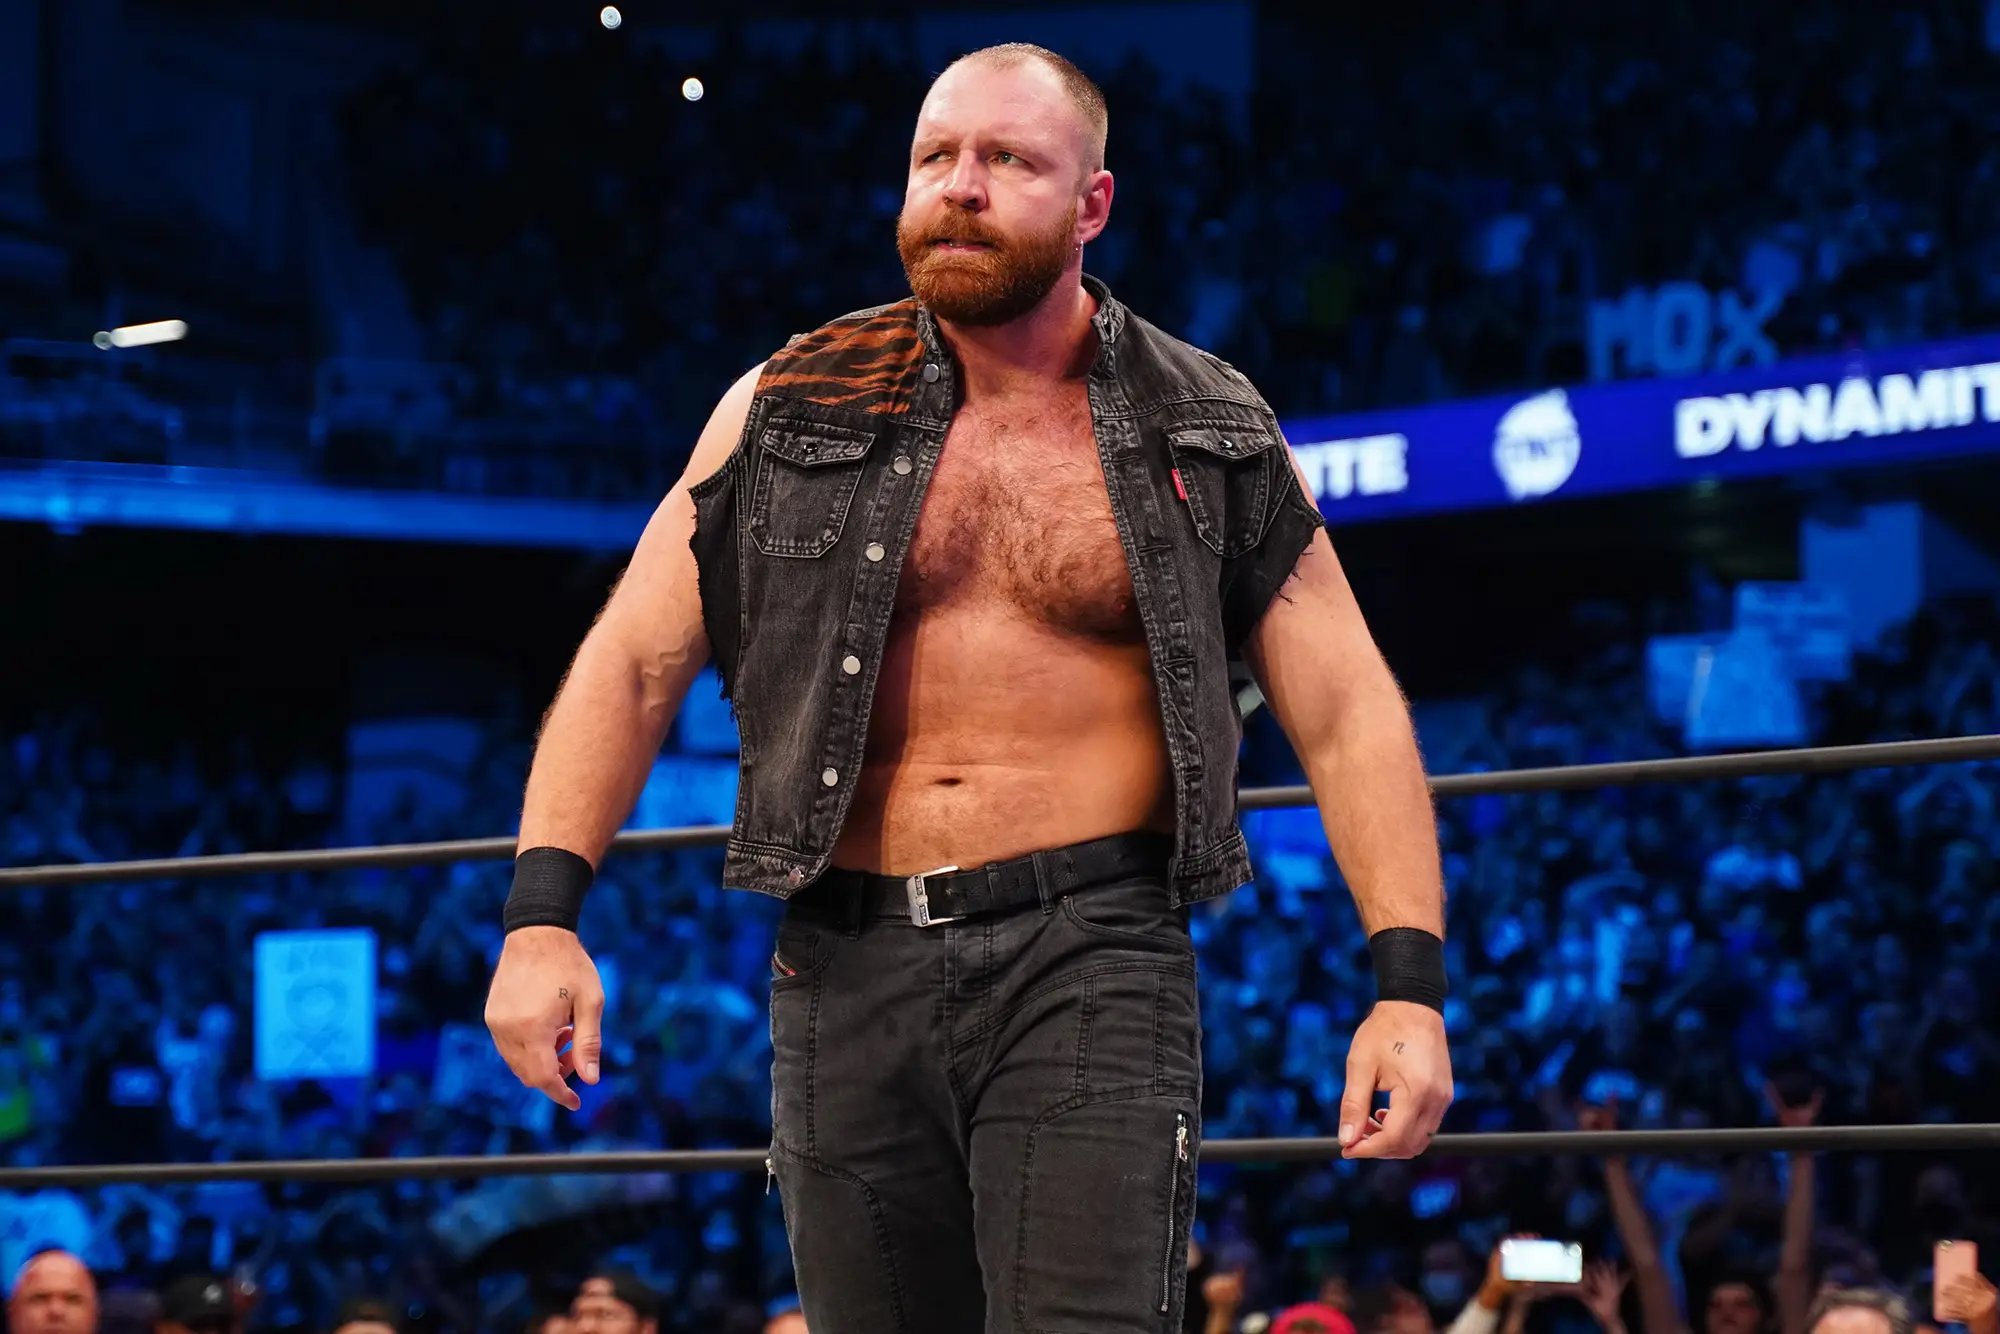 Tony Khan Praises Jon Moxley as One of the World’s Top Wrestlers